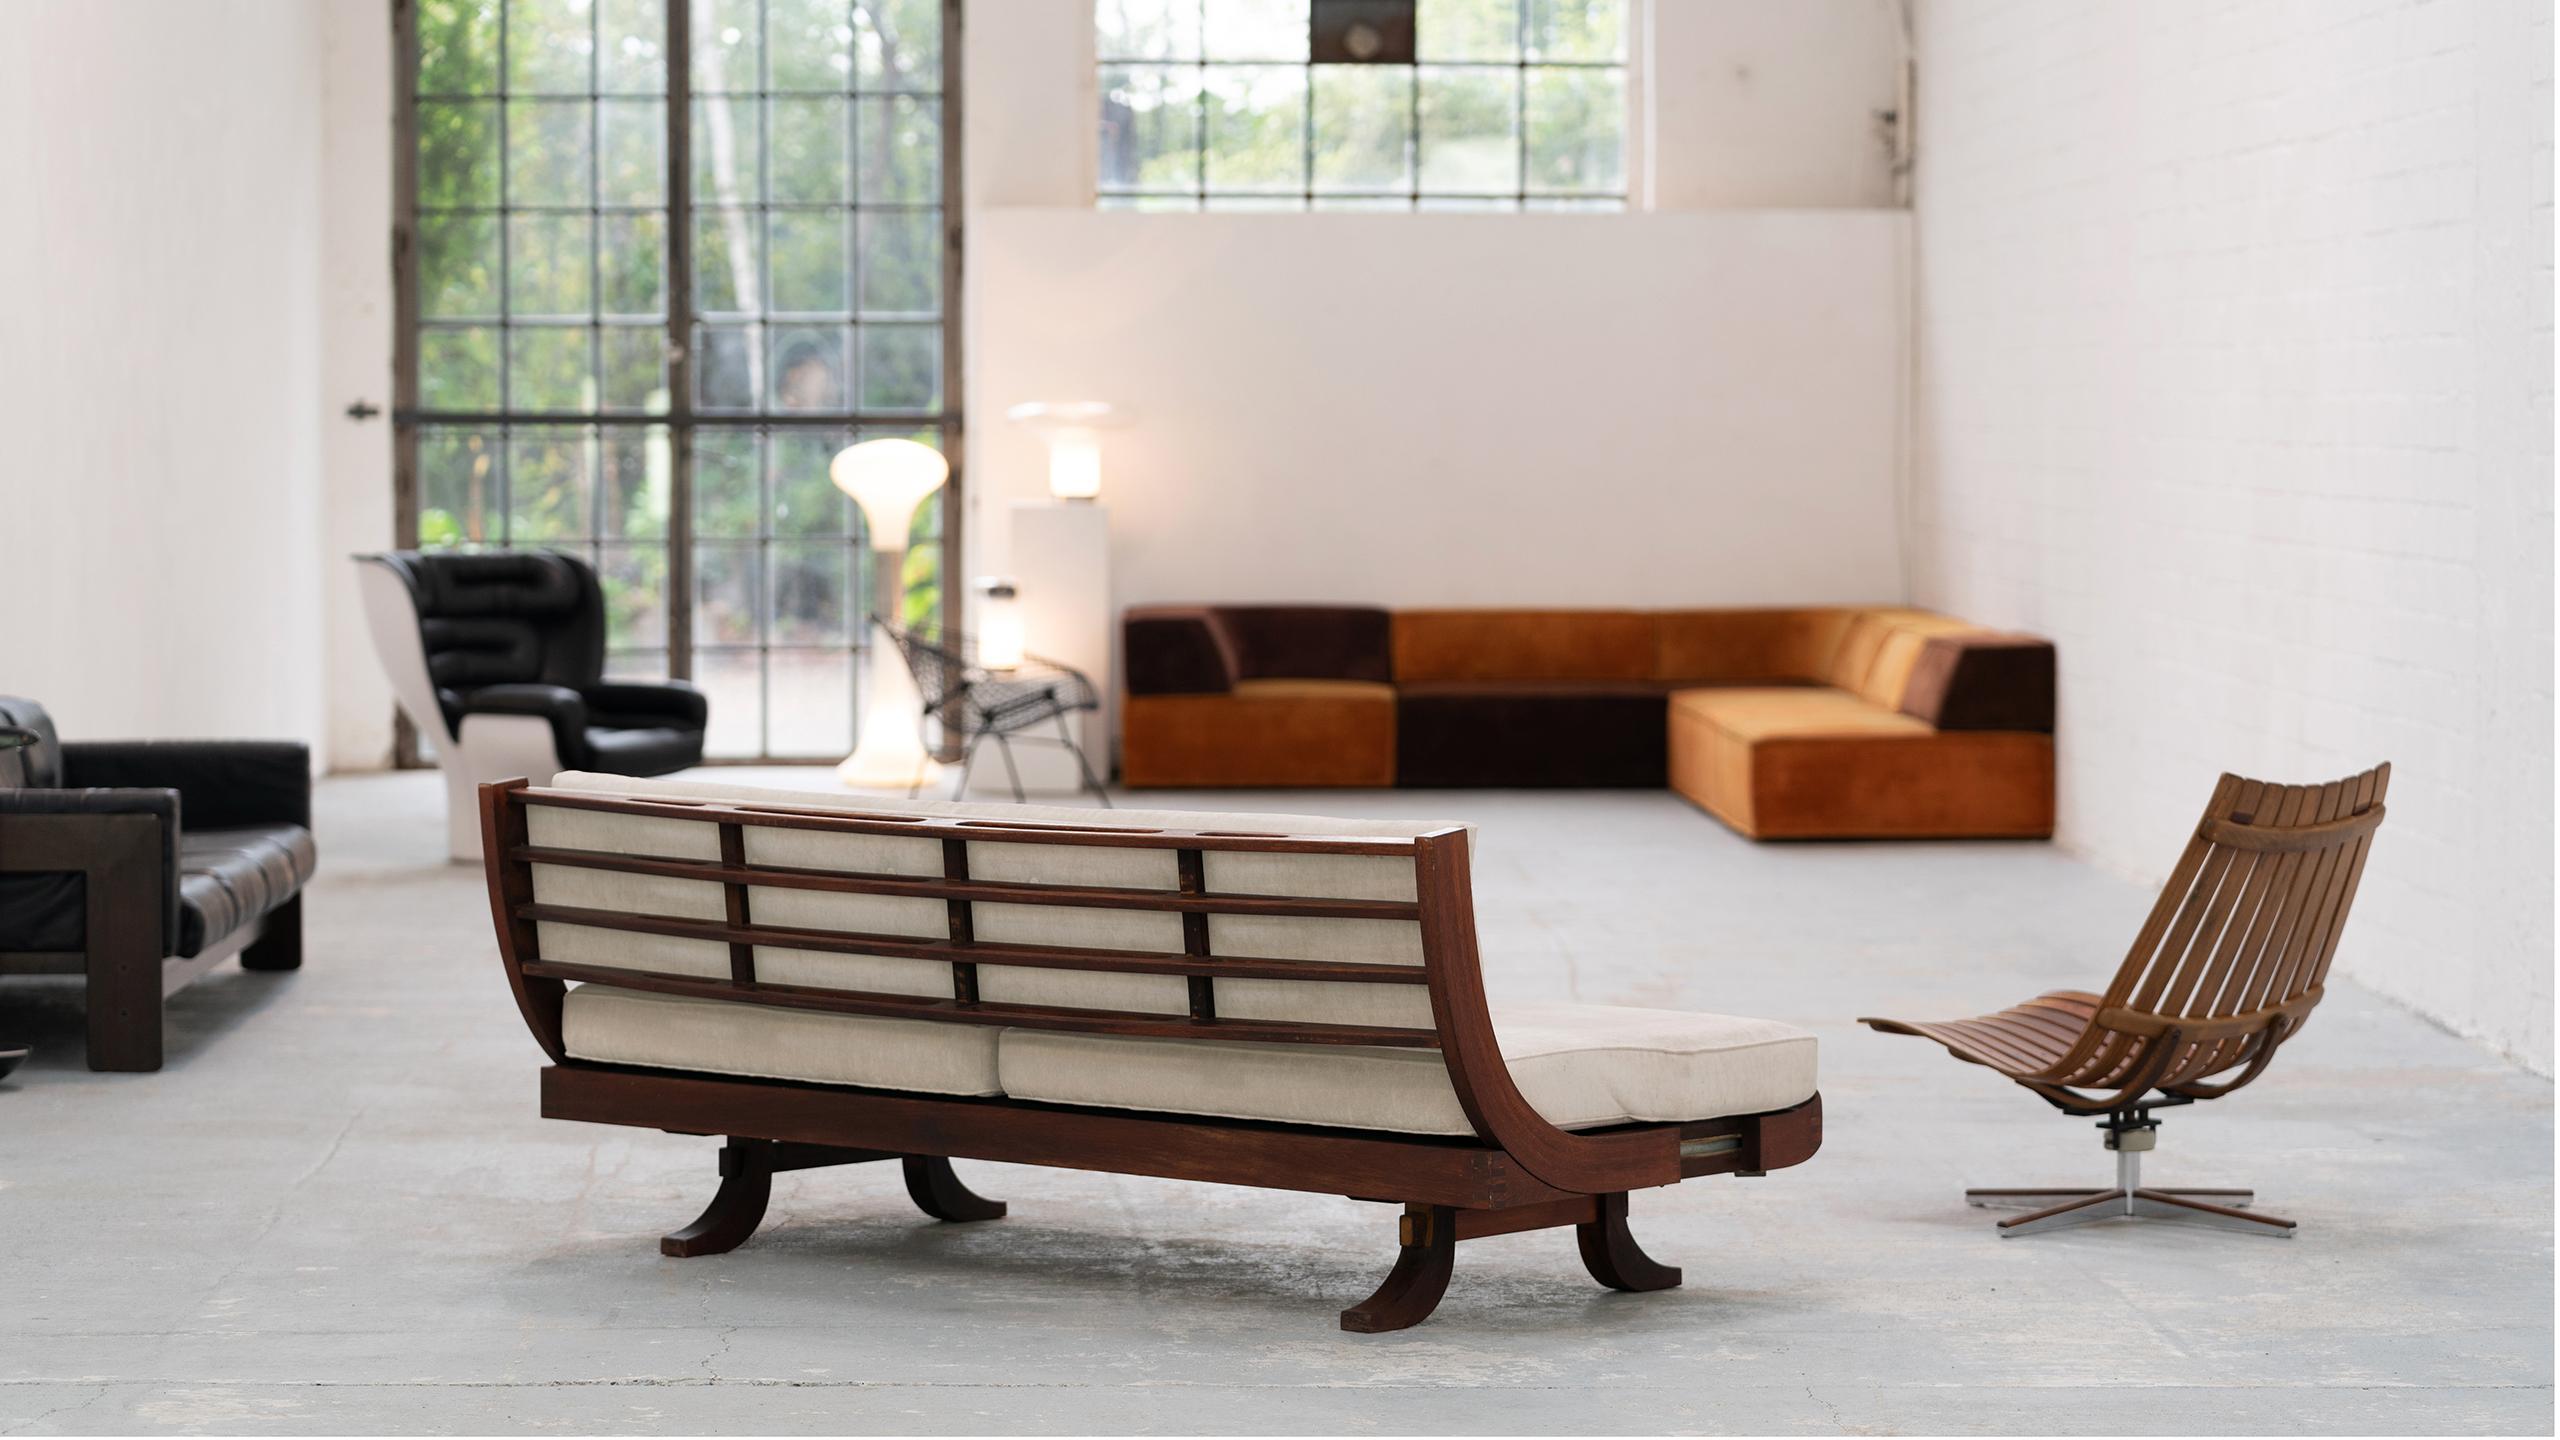 Brazilian Daybed & Sofa, 1966, Sophisticated Wood Details, Lounge & Relax 2